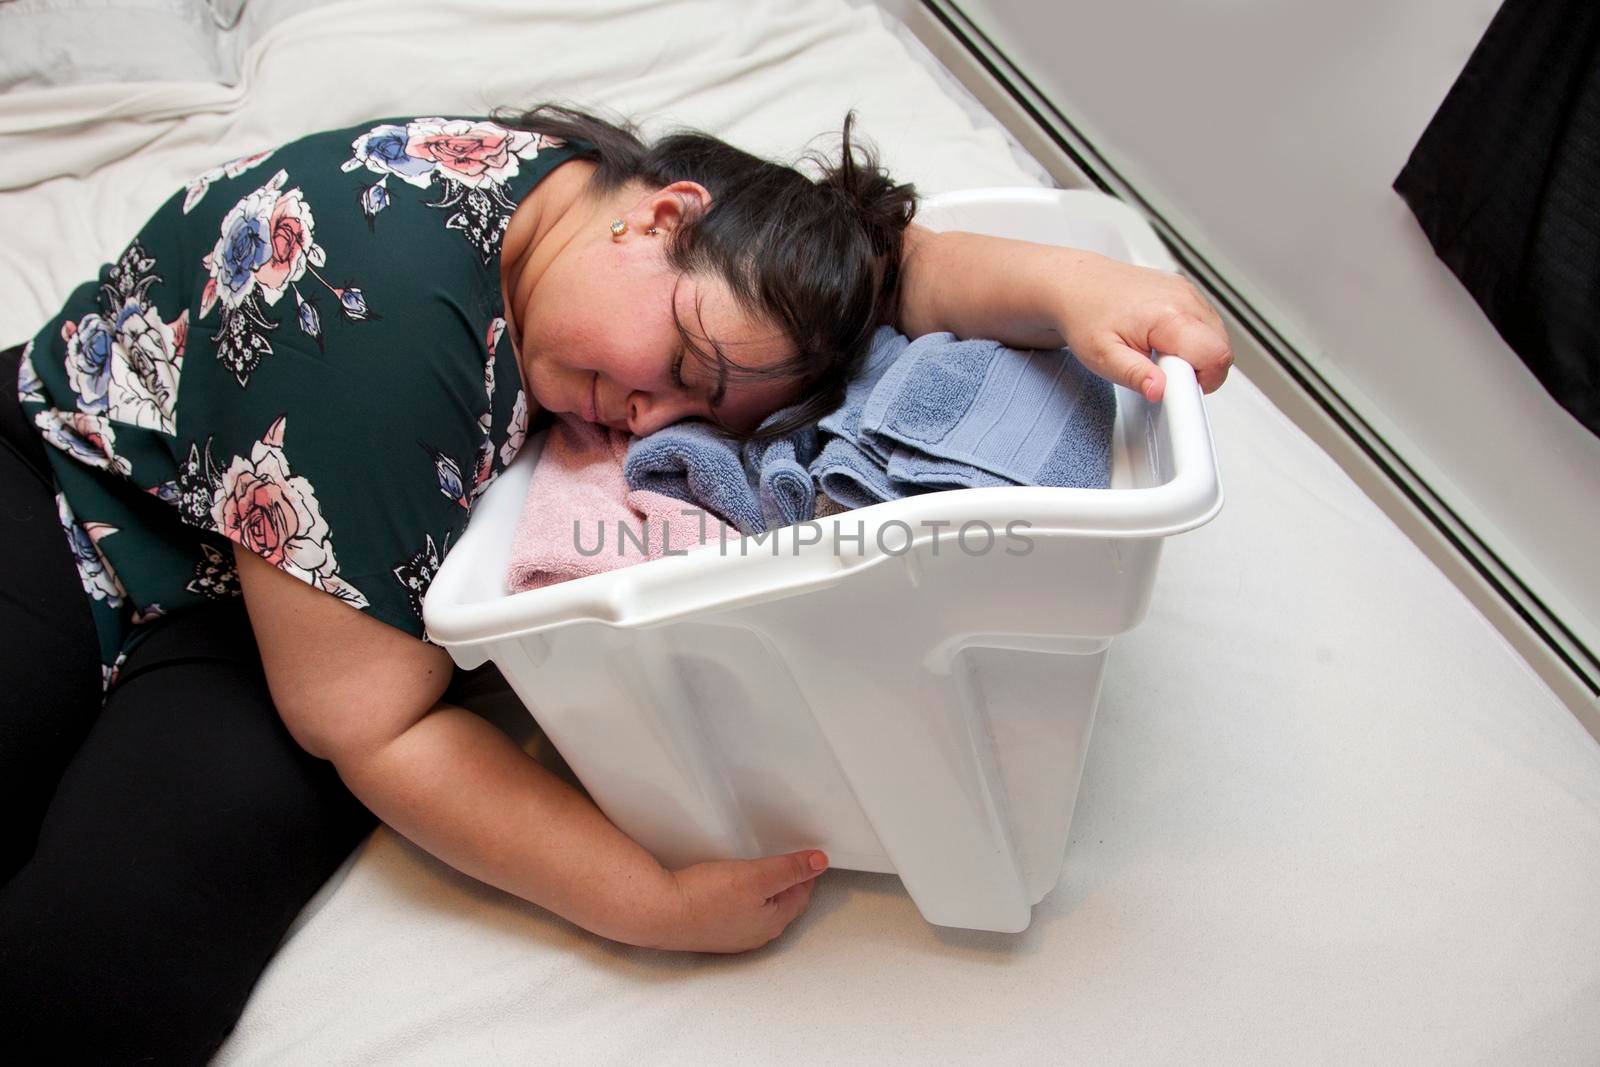 Latina woman has fallen asleep in a basket with several colorful folded towels 